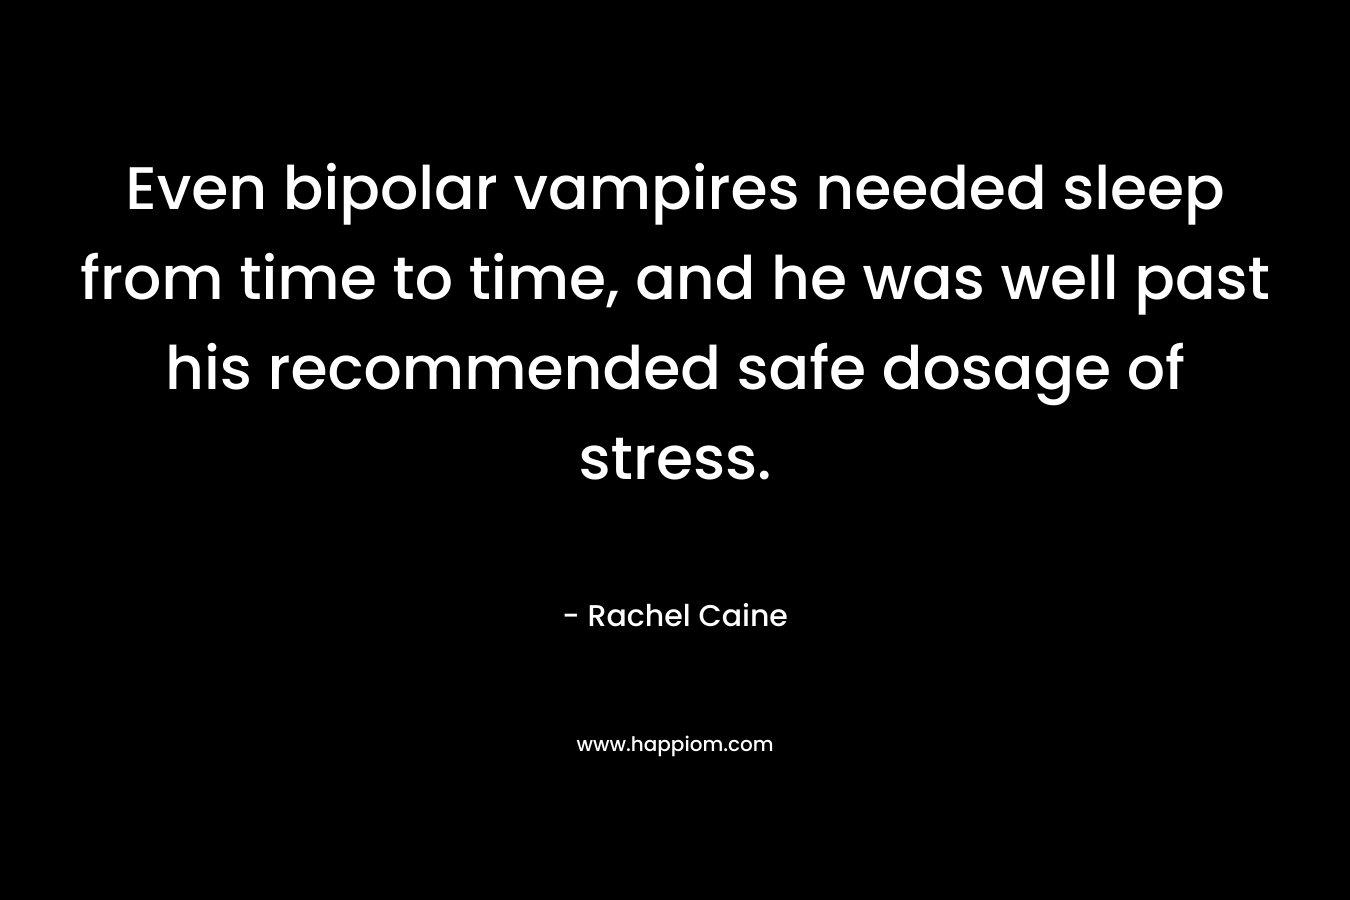 Even bipolar vampires needed sleep from time to time, and he was well past his recommended safe dosage of stress. – Rachel Caine